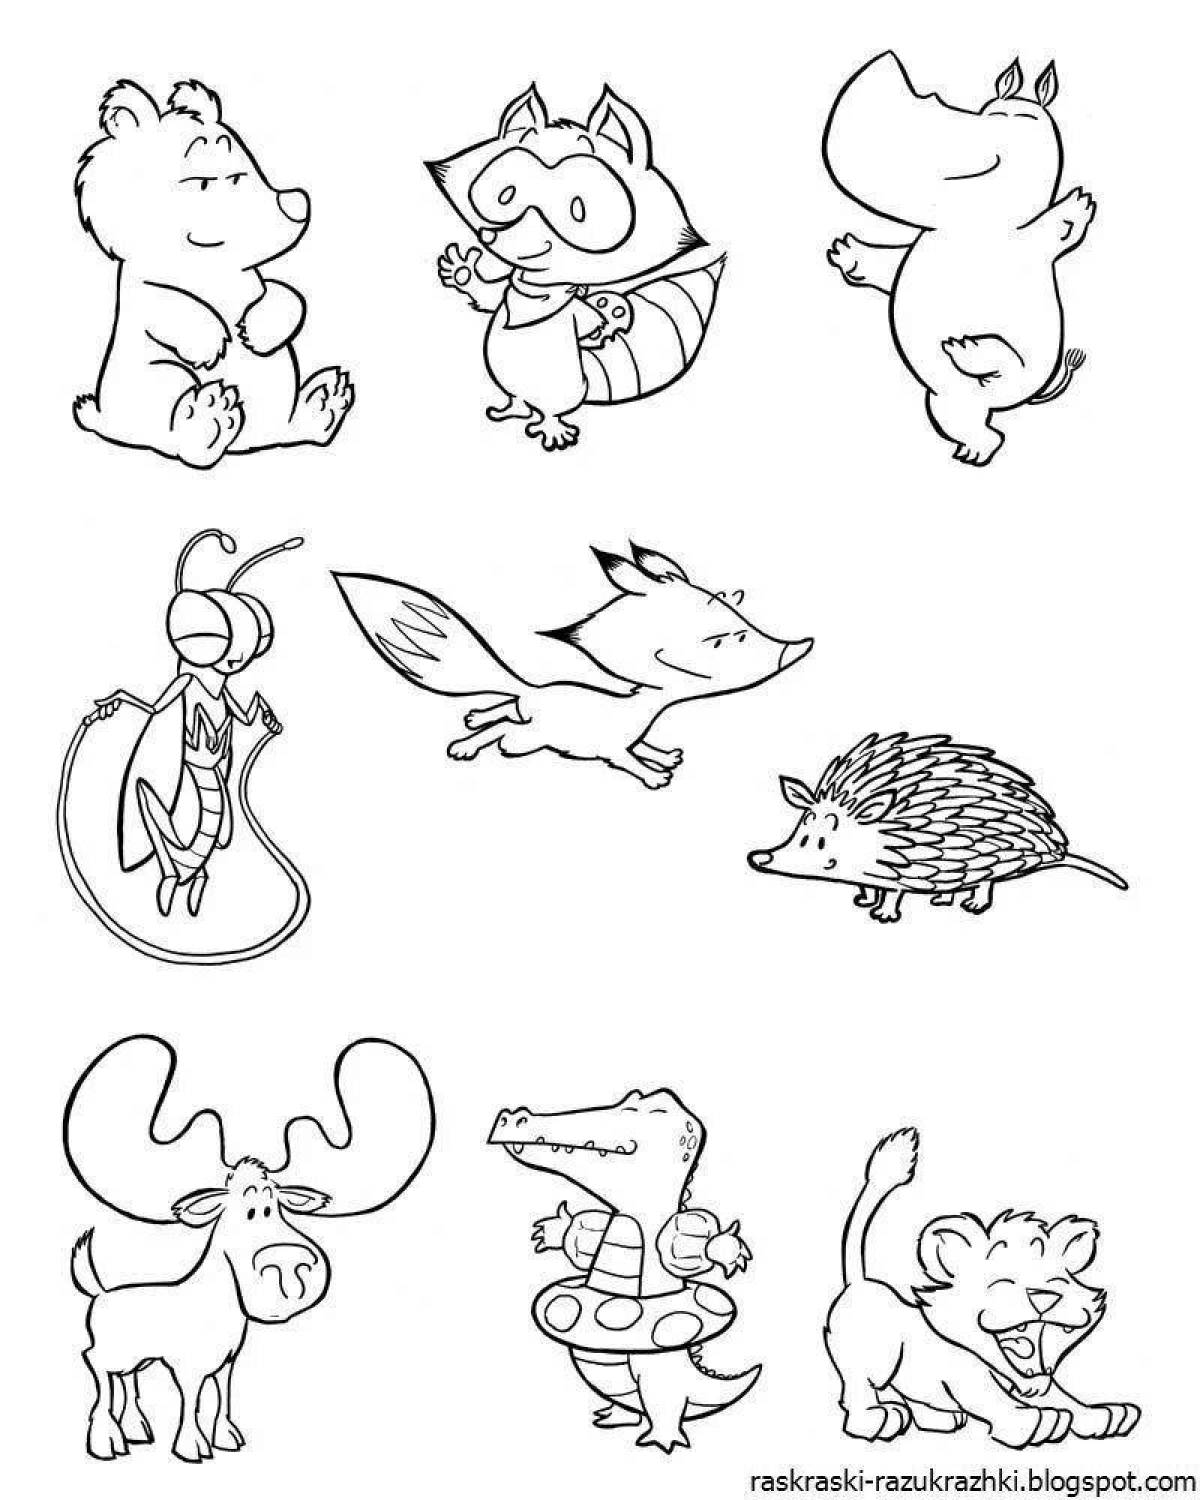 Friendly coloring small animals